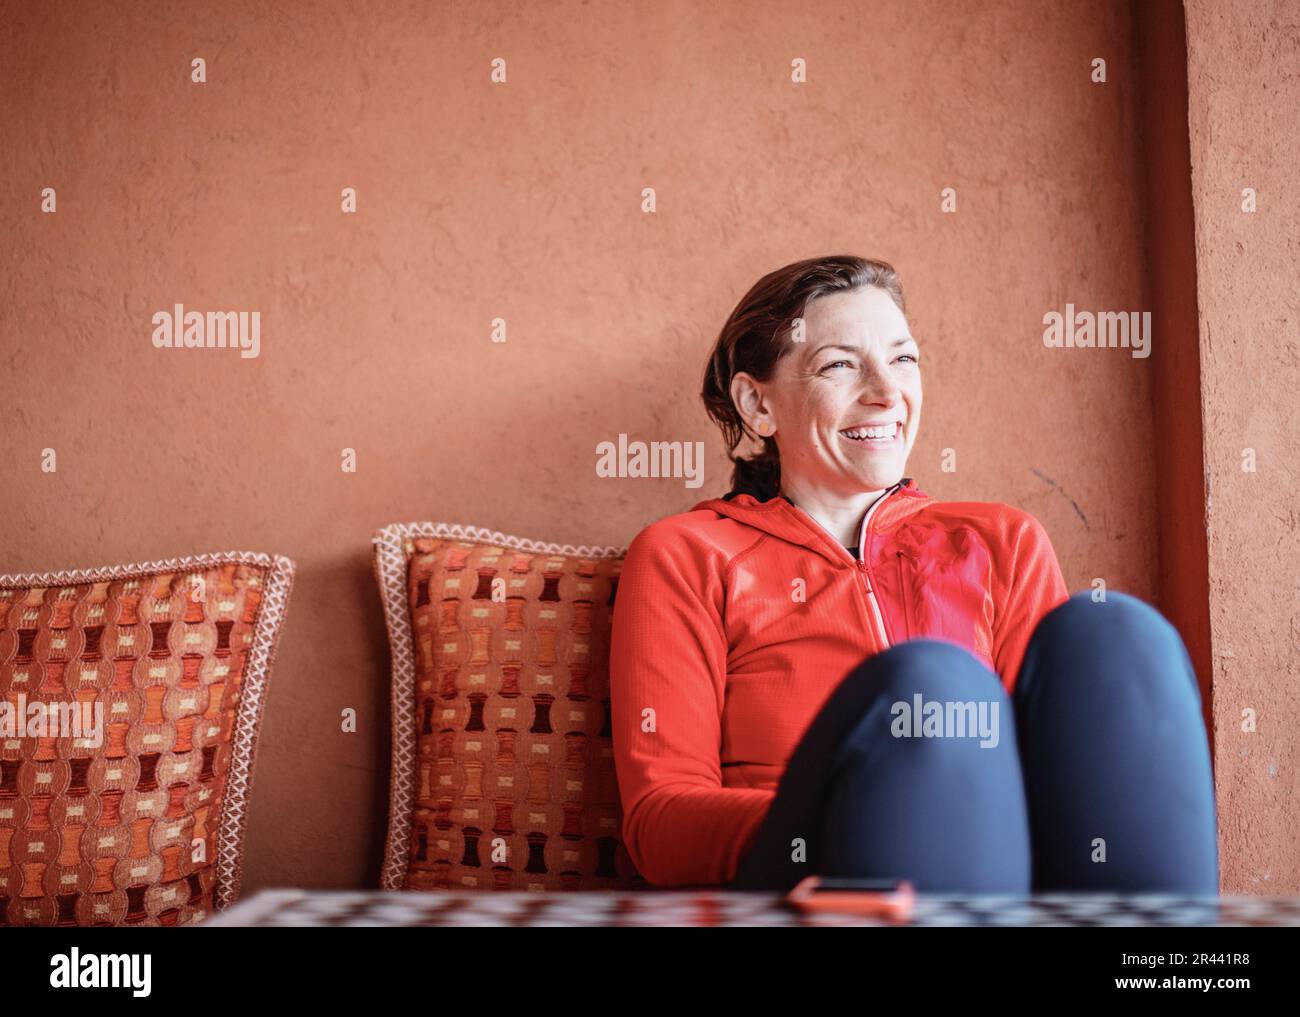 A smiling woman relaxes on  a couch next to an adobe wall in Morocco Stock Photo